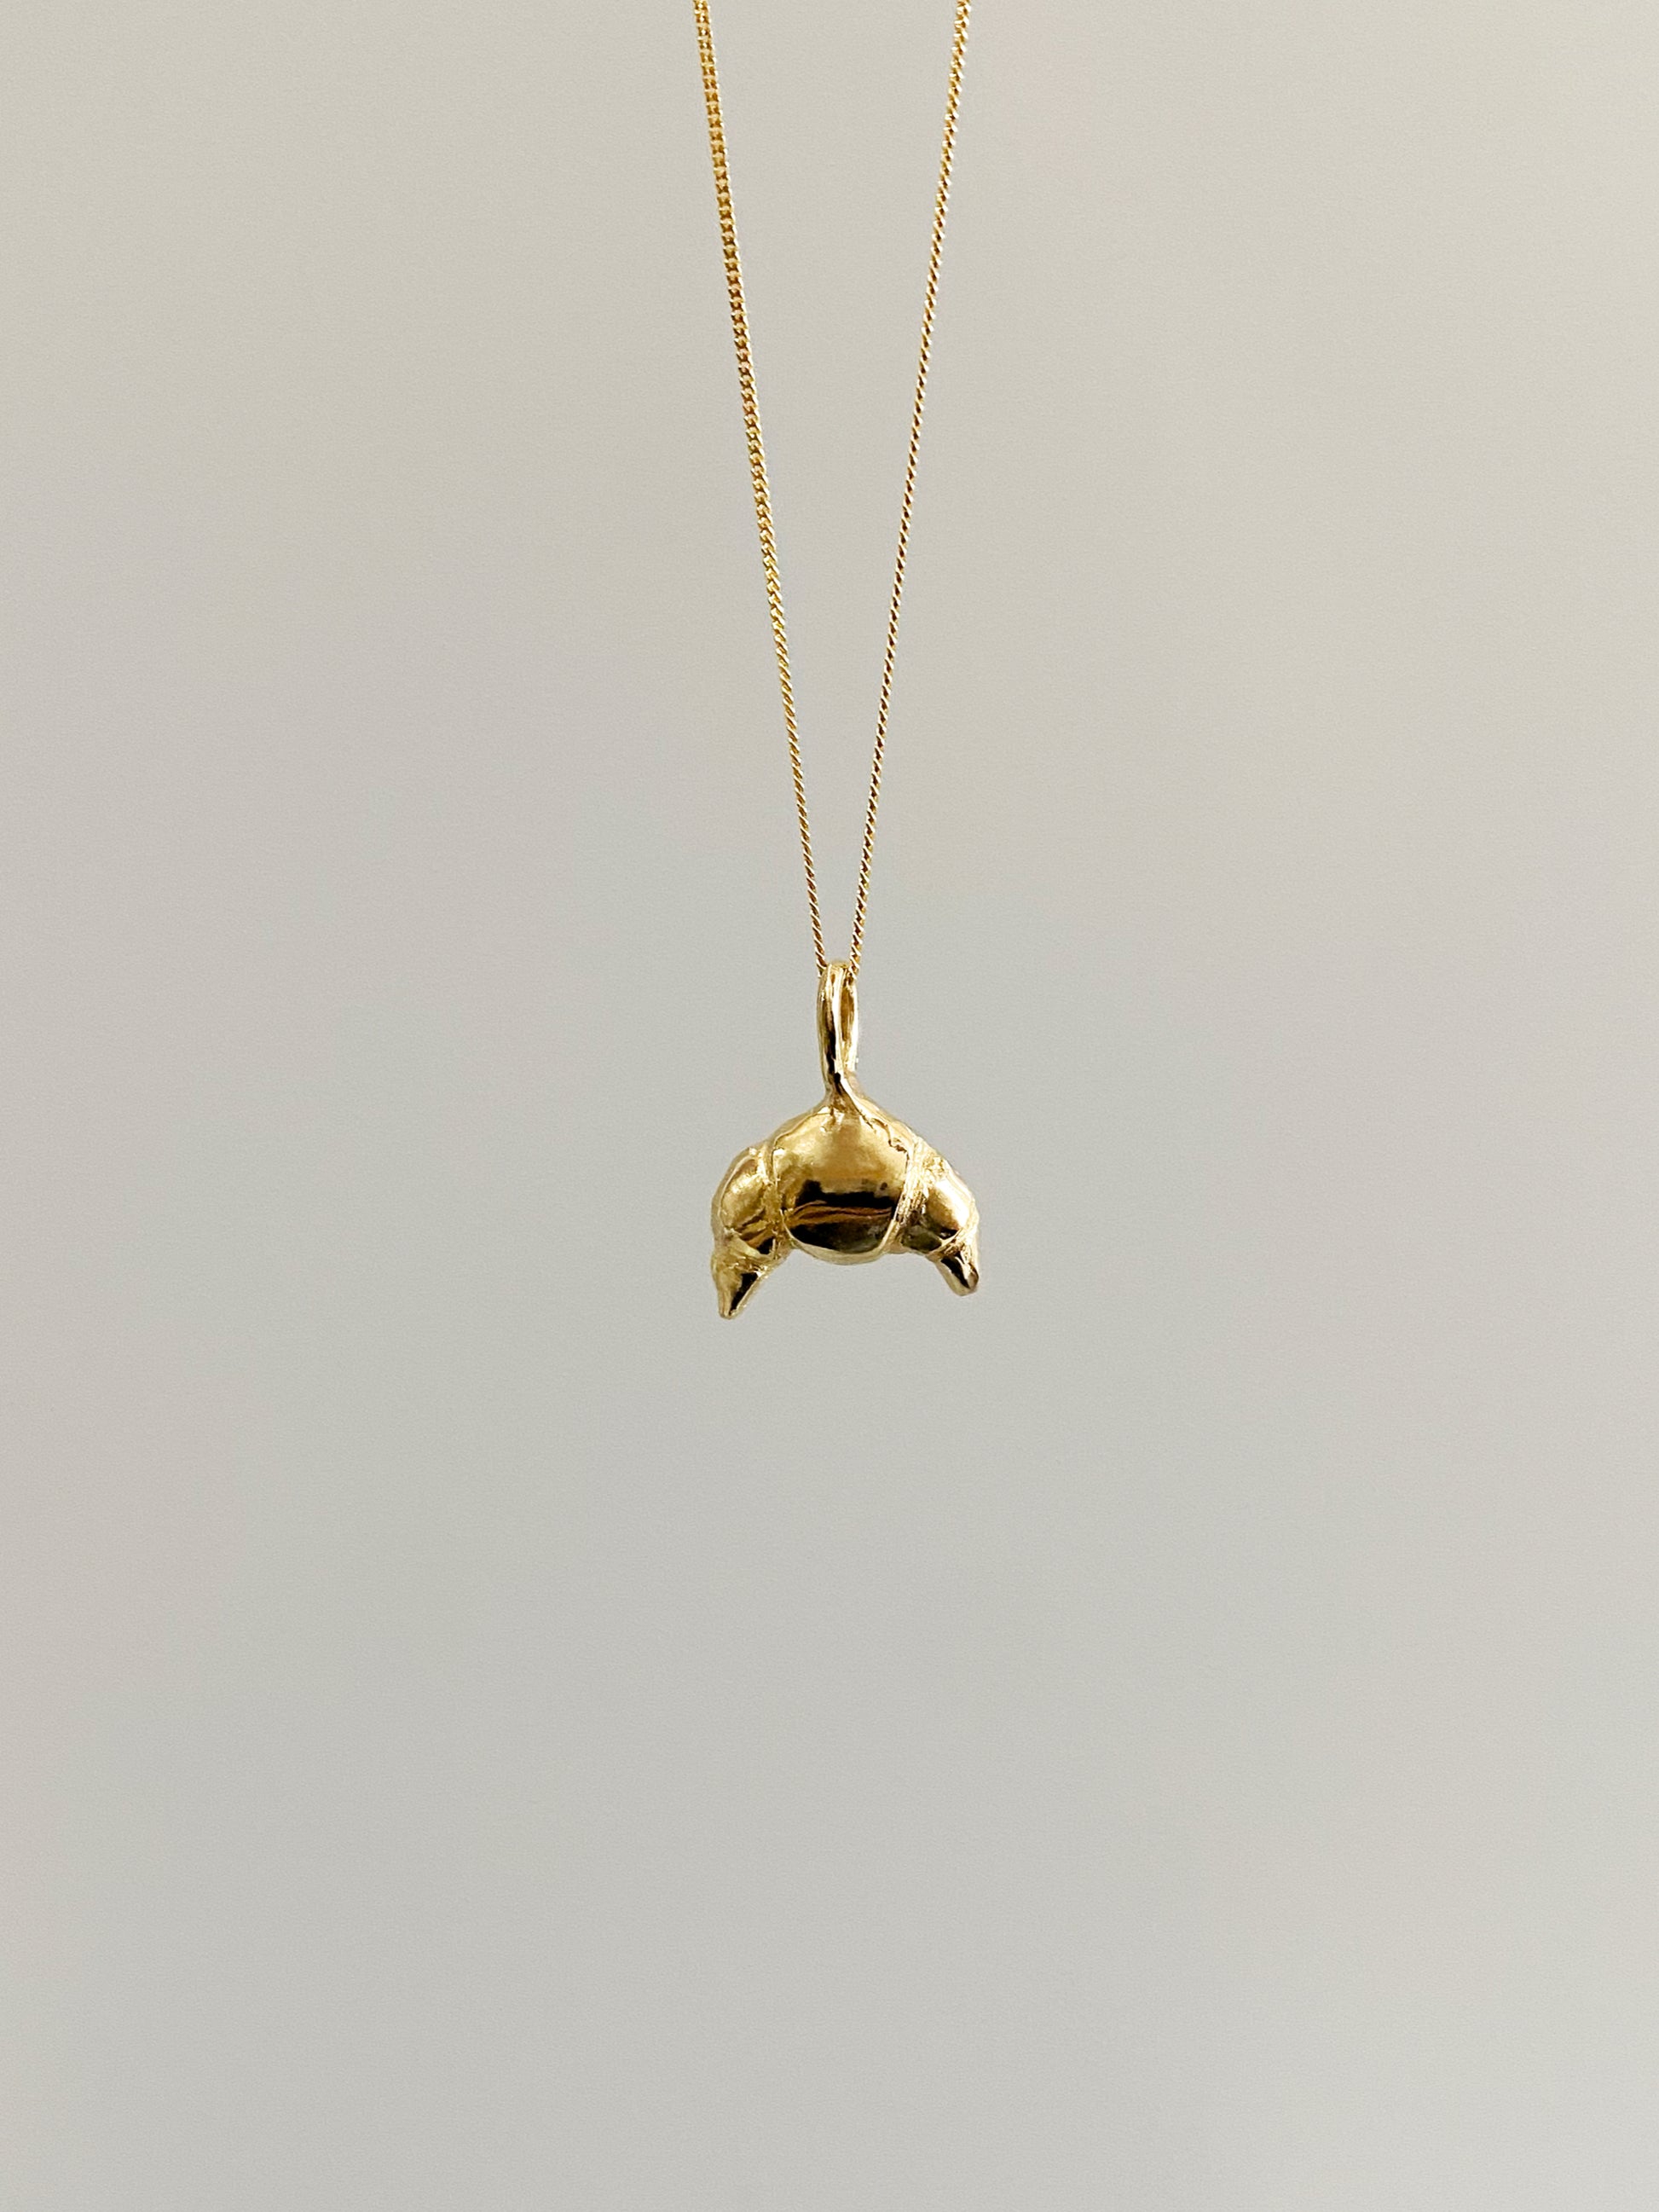 Gold croissant necklace on grey background